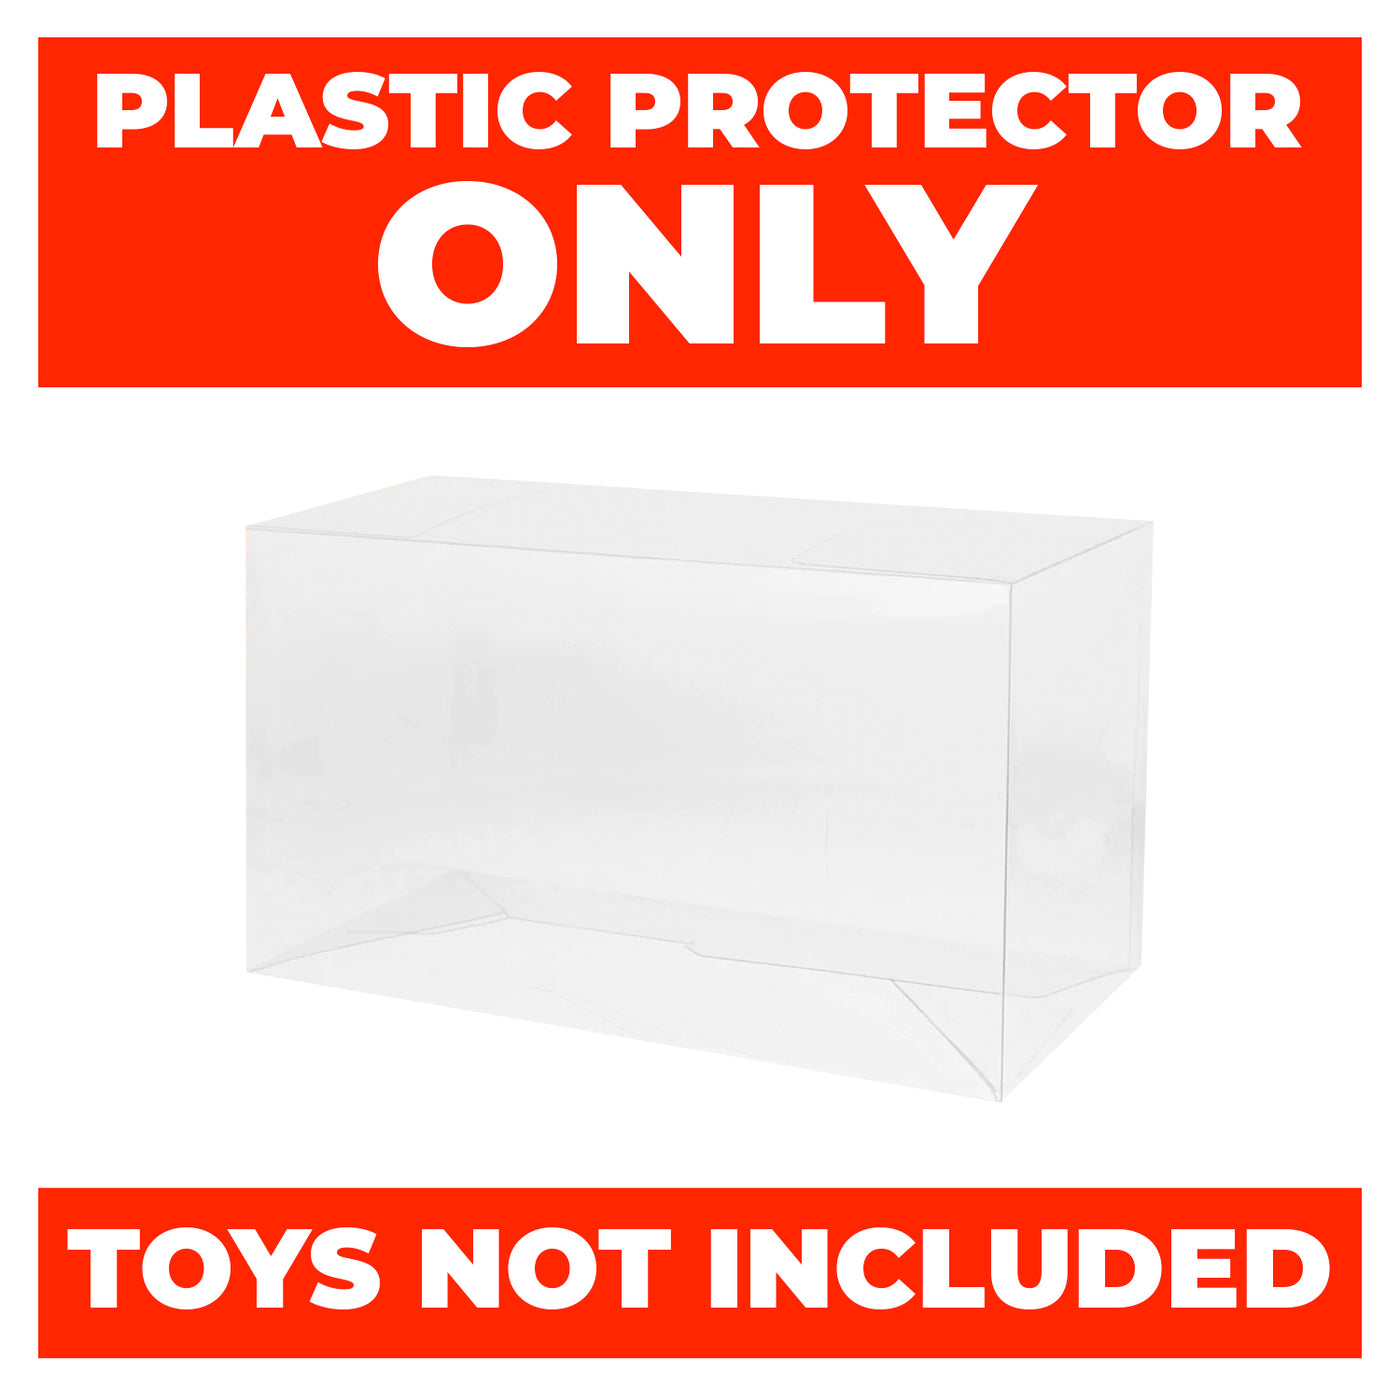 pop games dungeons and dragons tiamat nycc best funko pop protectors thick strong uv scratch flat top stack vinyl display geek plastic shield vaulted eco armor fits collect protect display case kollector protector